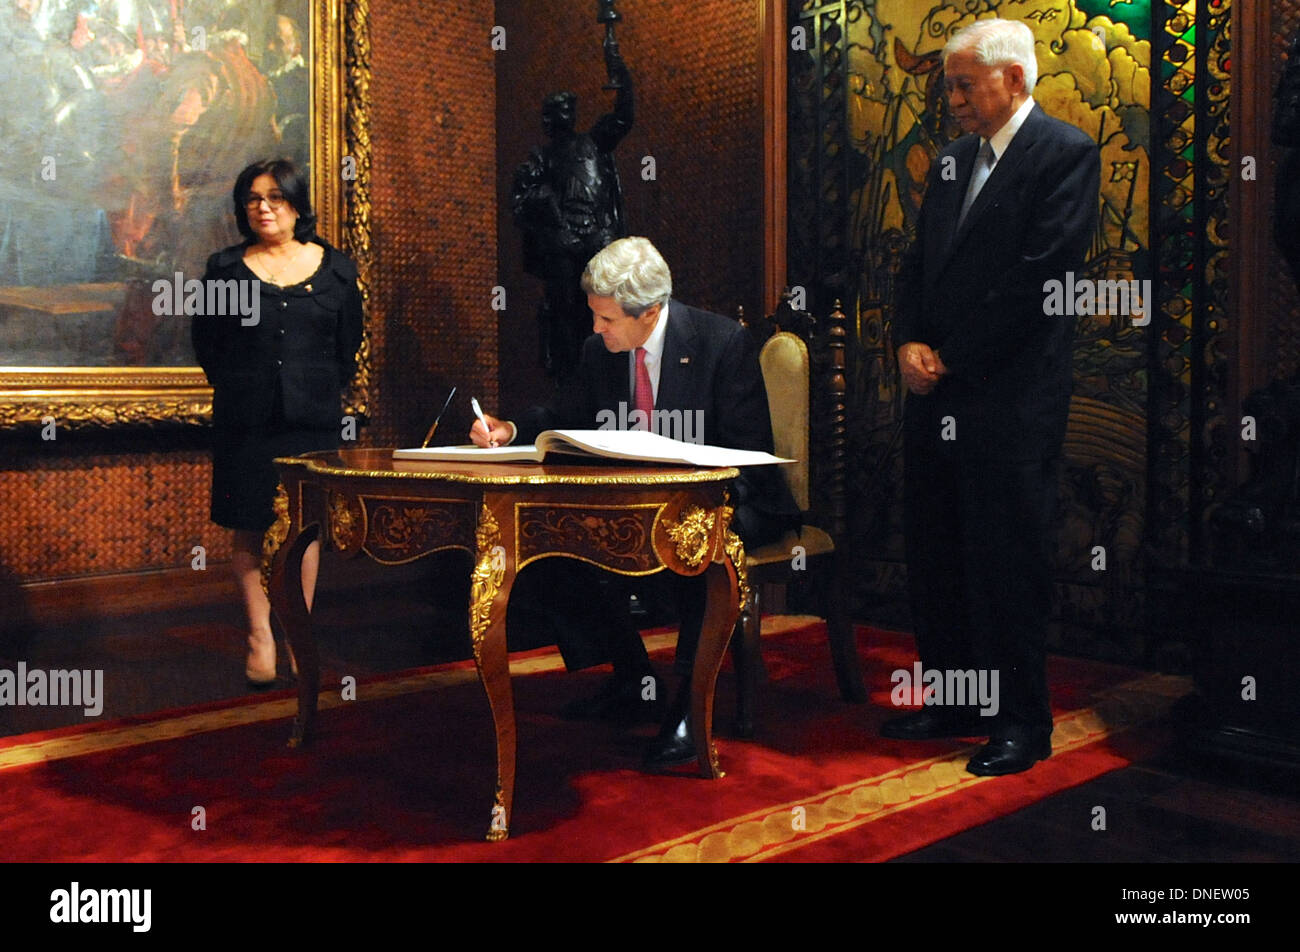 Secretary Kerry Signs the Guest Book at Malacanang Palace in Manila Stock Photo